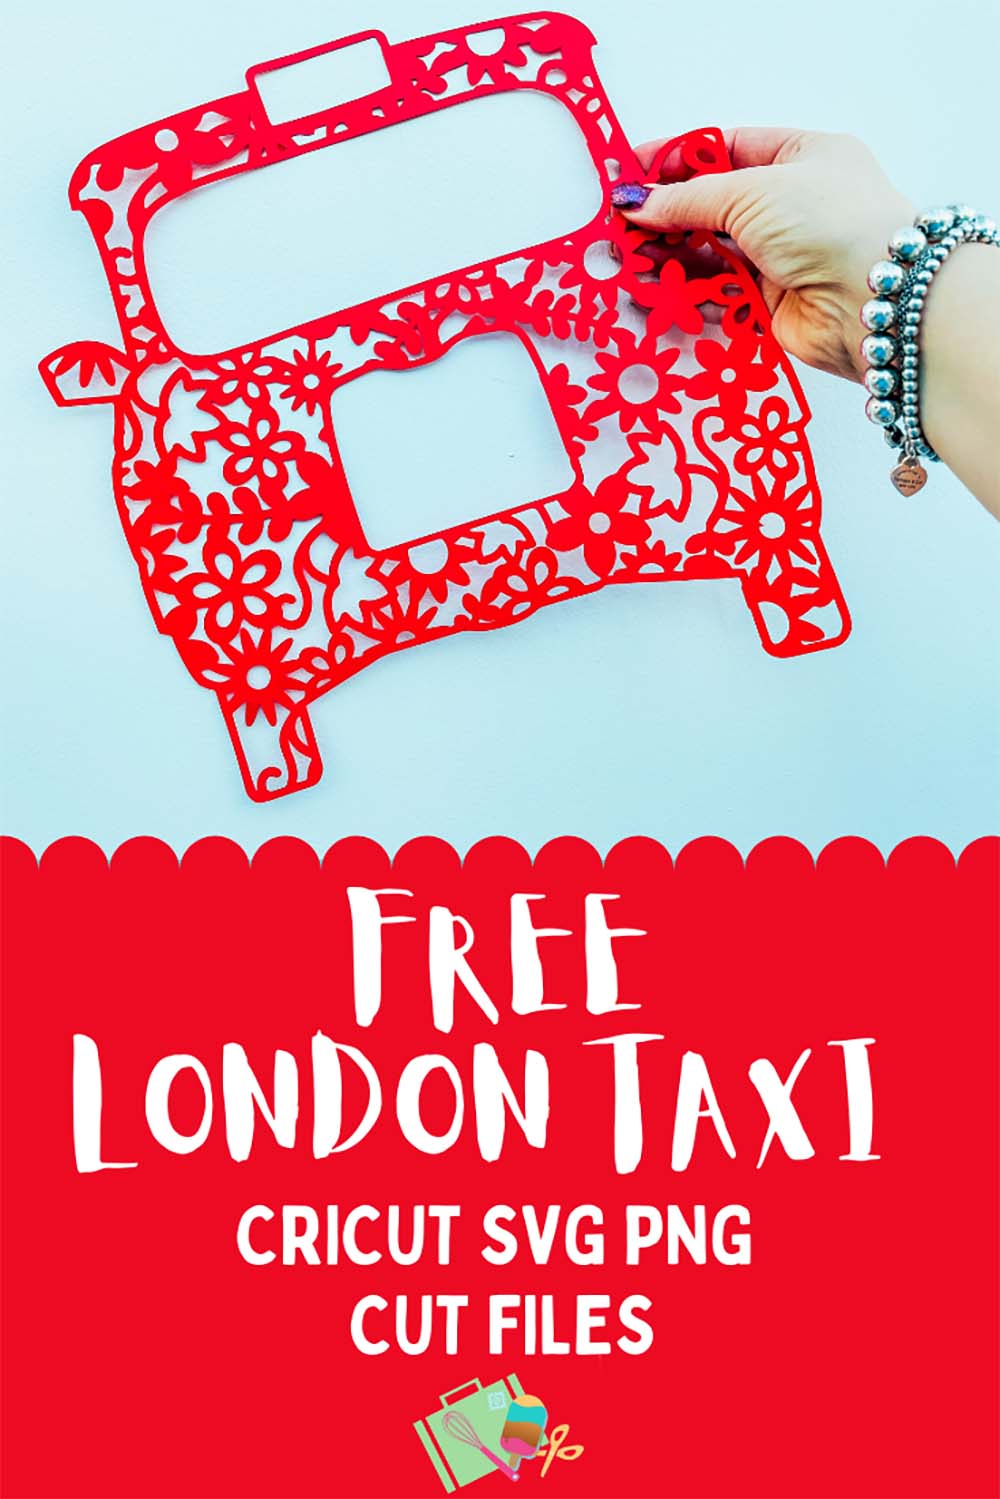 Free London Taxi Cut File SVG PNG For Cricut Crafting and Scrapbooking